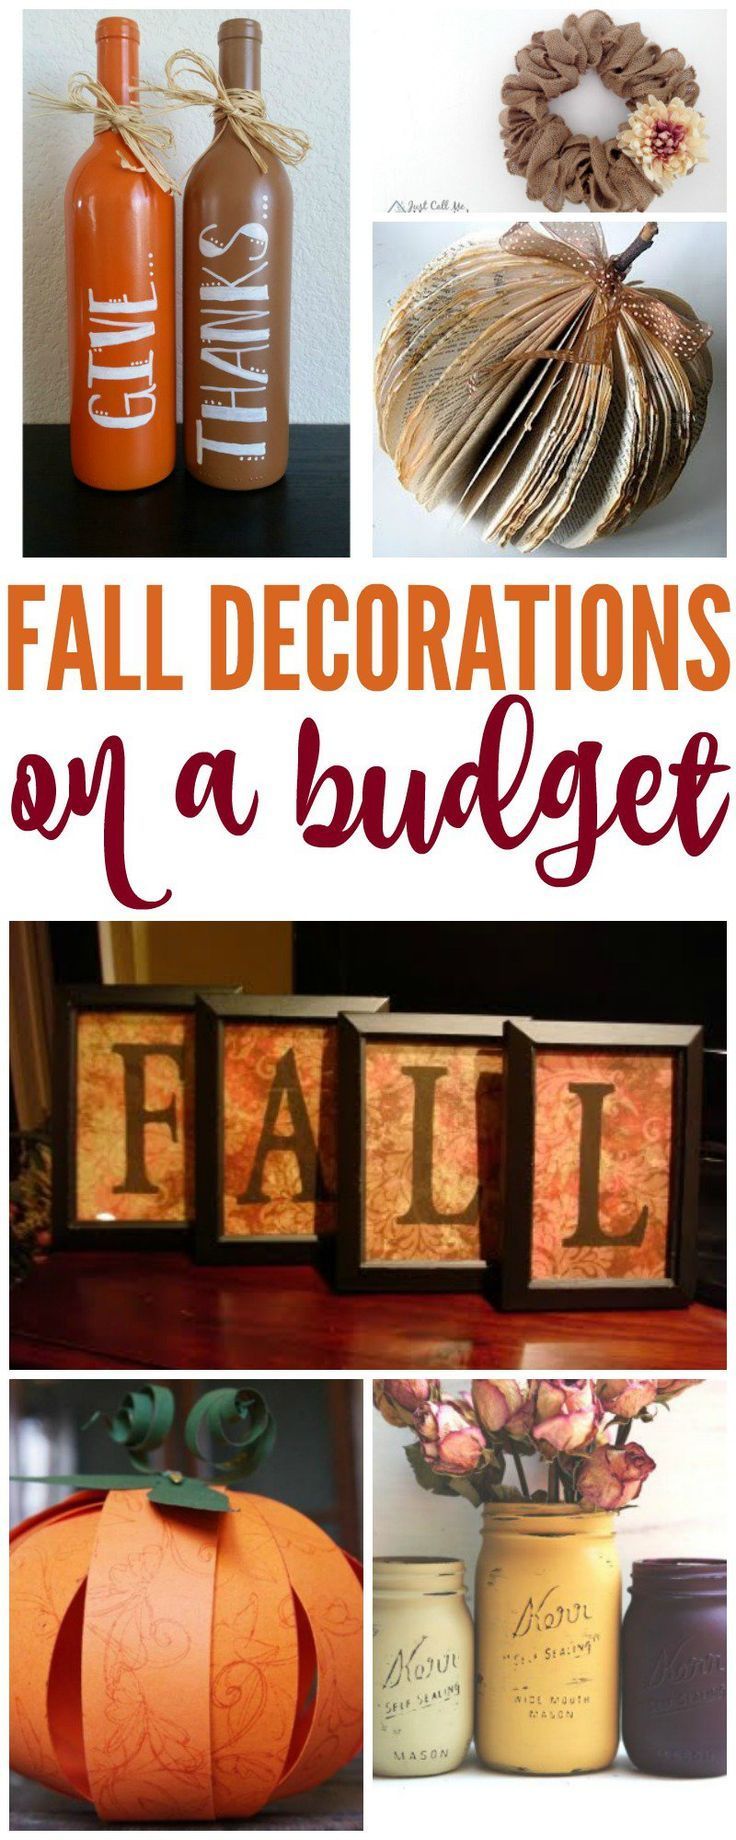 How to Make Fall Decorations on a Budget! DIY Ideas and simple crafts for Fall and Thanksgiving!